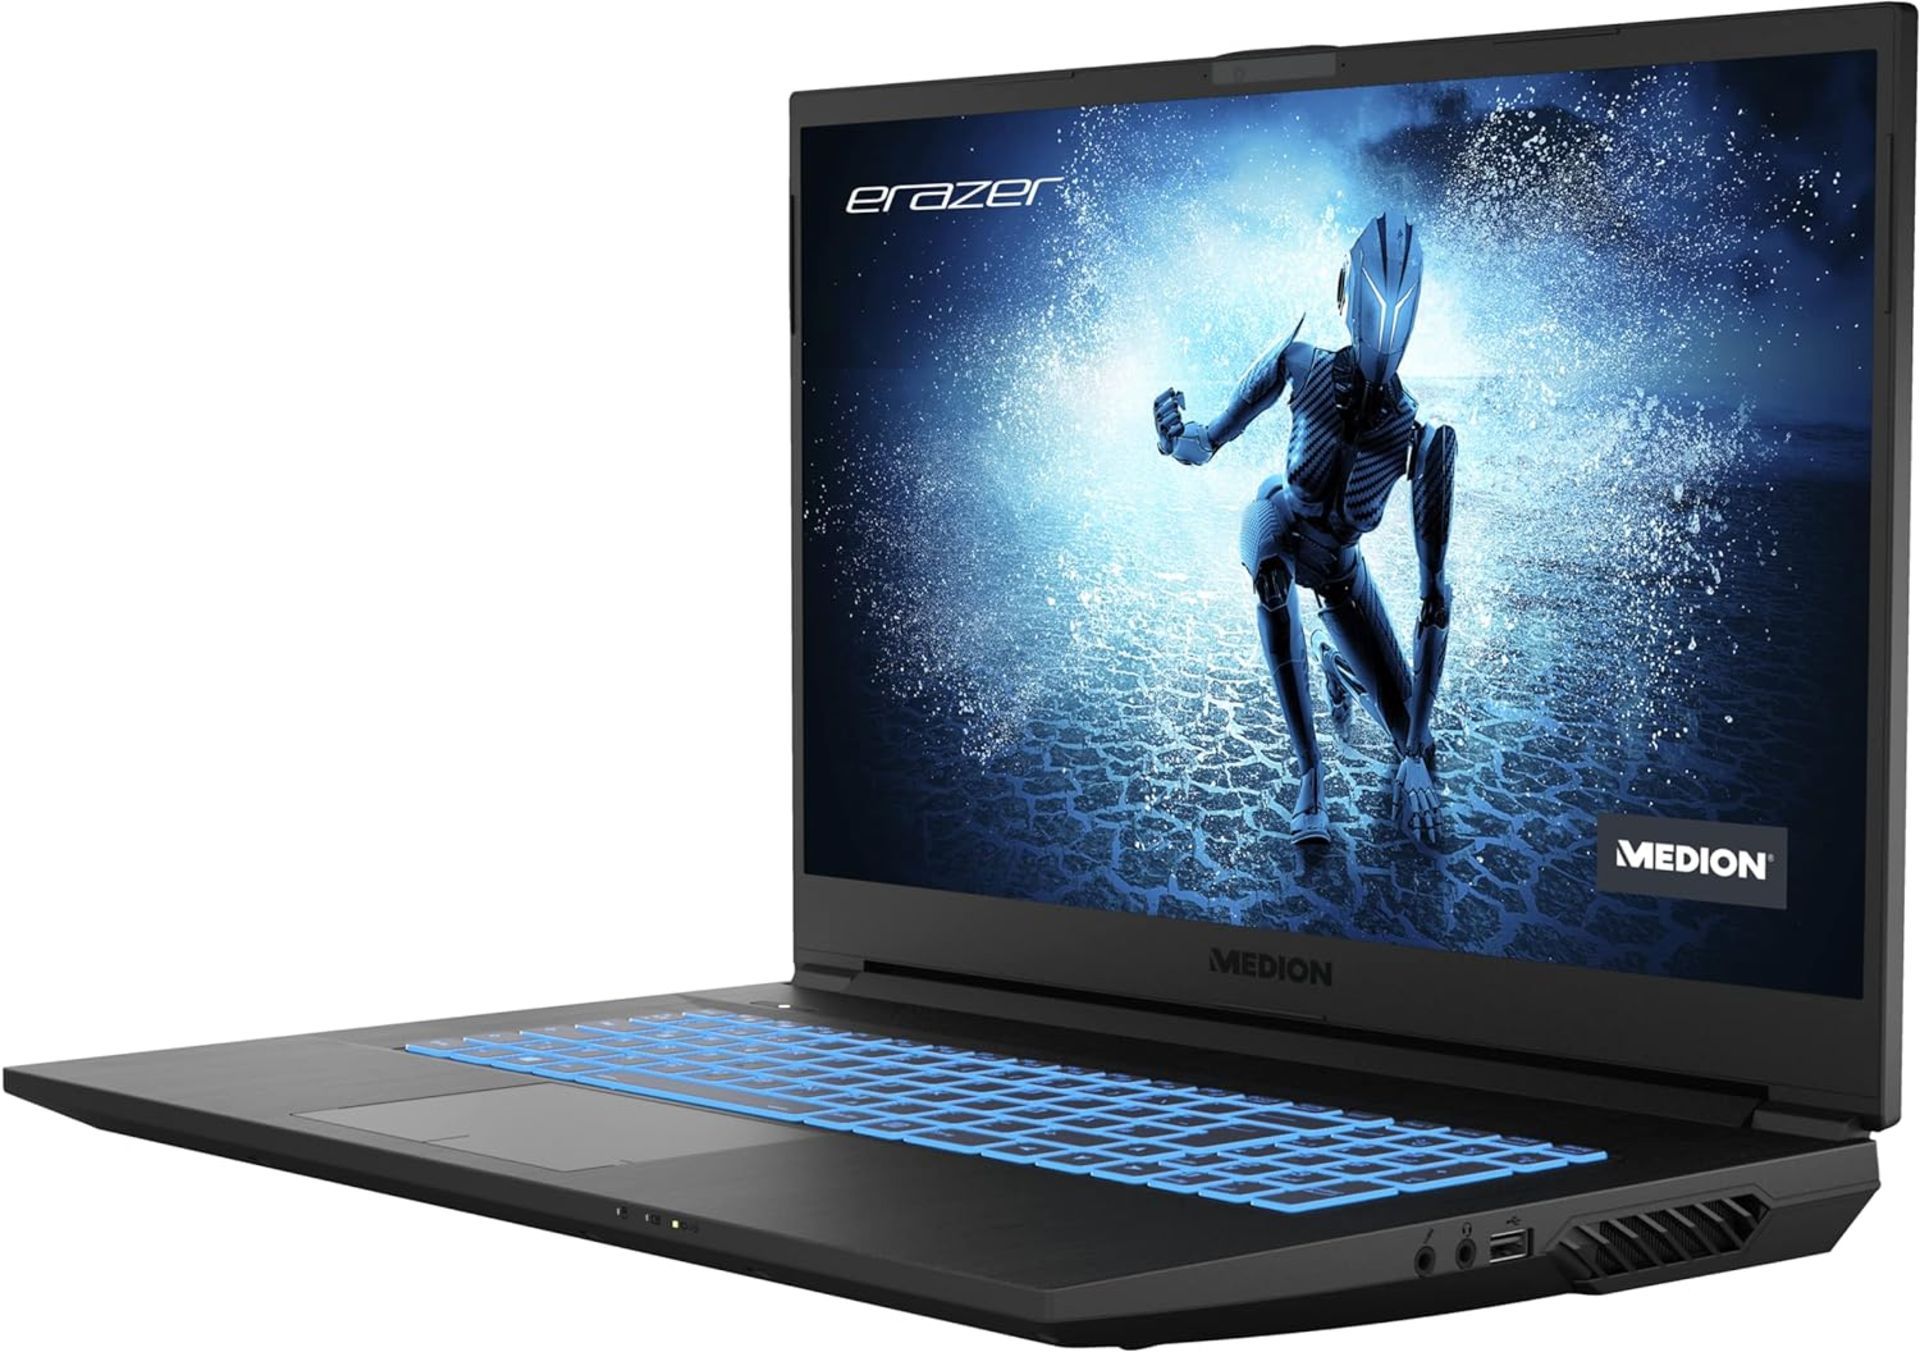 NEW & BOXED MEDION Erazer Defender P15 17.3" Gaming Laptop. RRP £1149.95. 17.3" 144hz FHD Screen, - Image 2 of 6